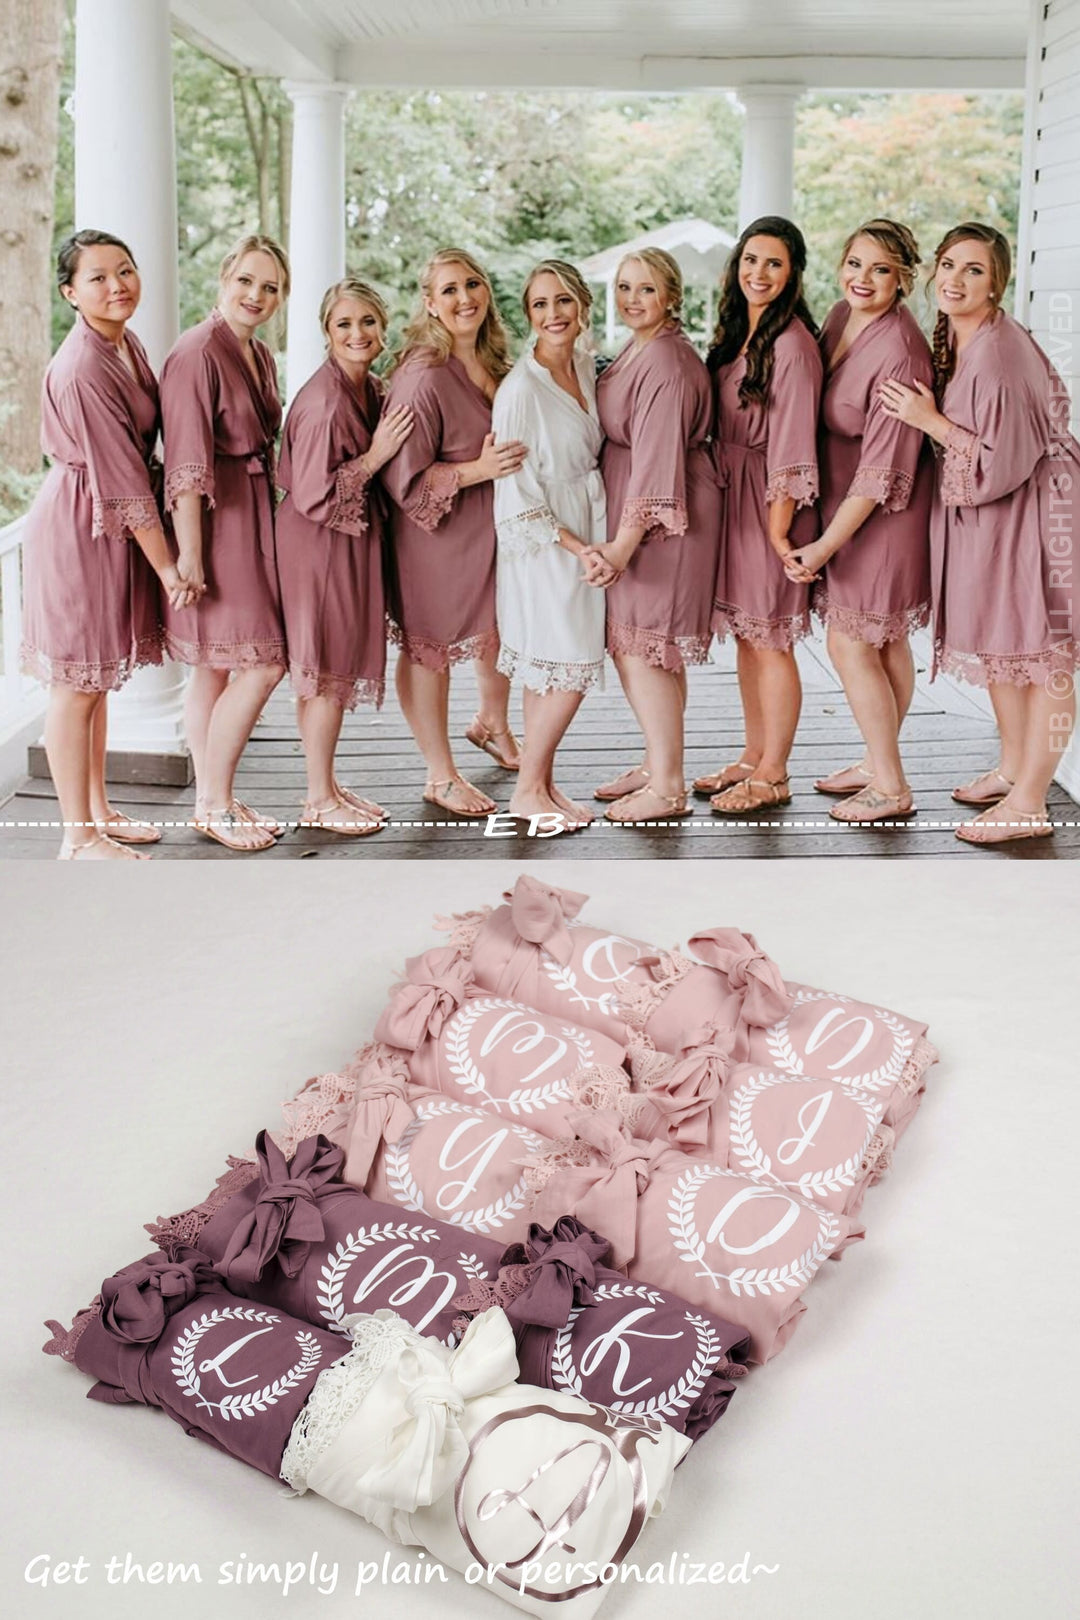 Bridal Lace Solid Robes, Regular and Plus size, Bride robes, Bridesmaid robe, Personalized robes, getting ready dressing gown, Mauve